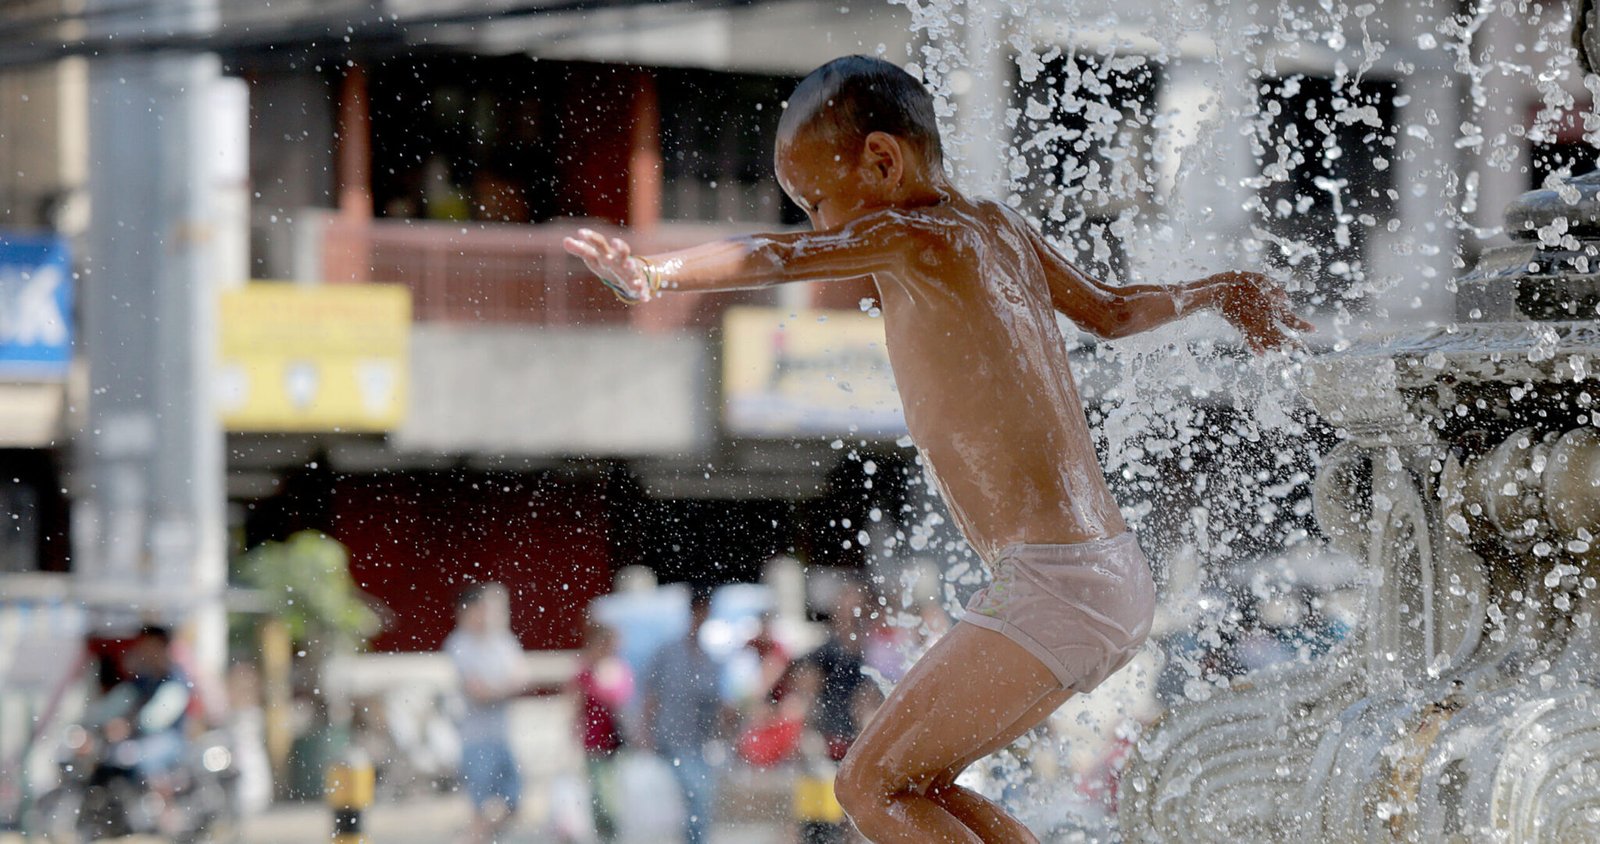 A boy frolics at a fountain to cool off from the summer heat